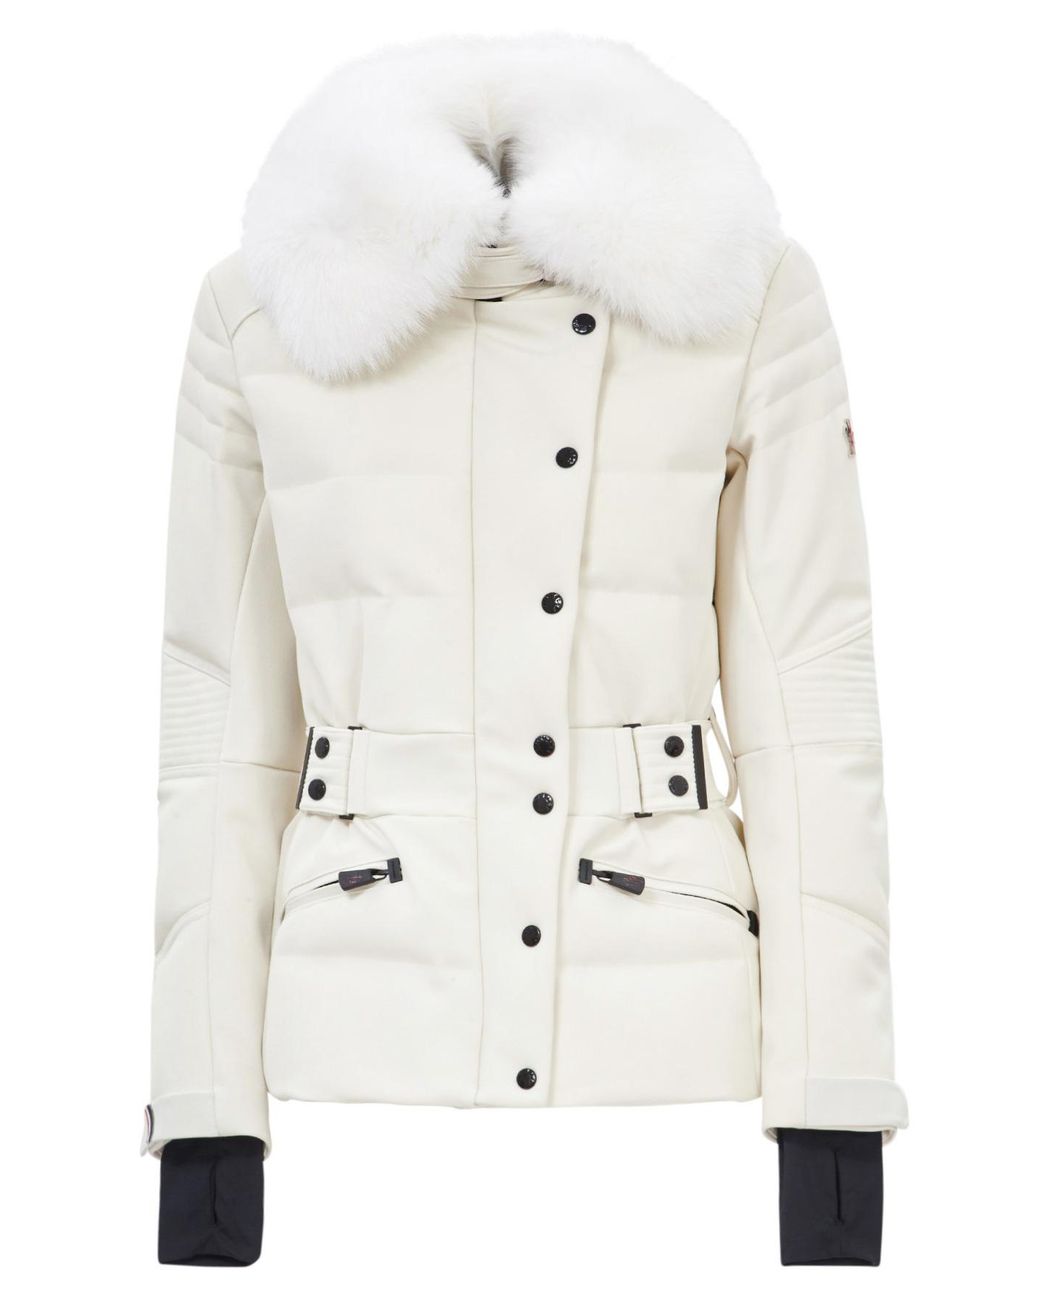 3 MONCLER GRENOBLE Fur Collar Quilted Jacket in White | Lyst